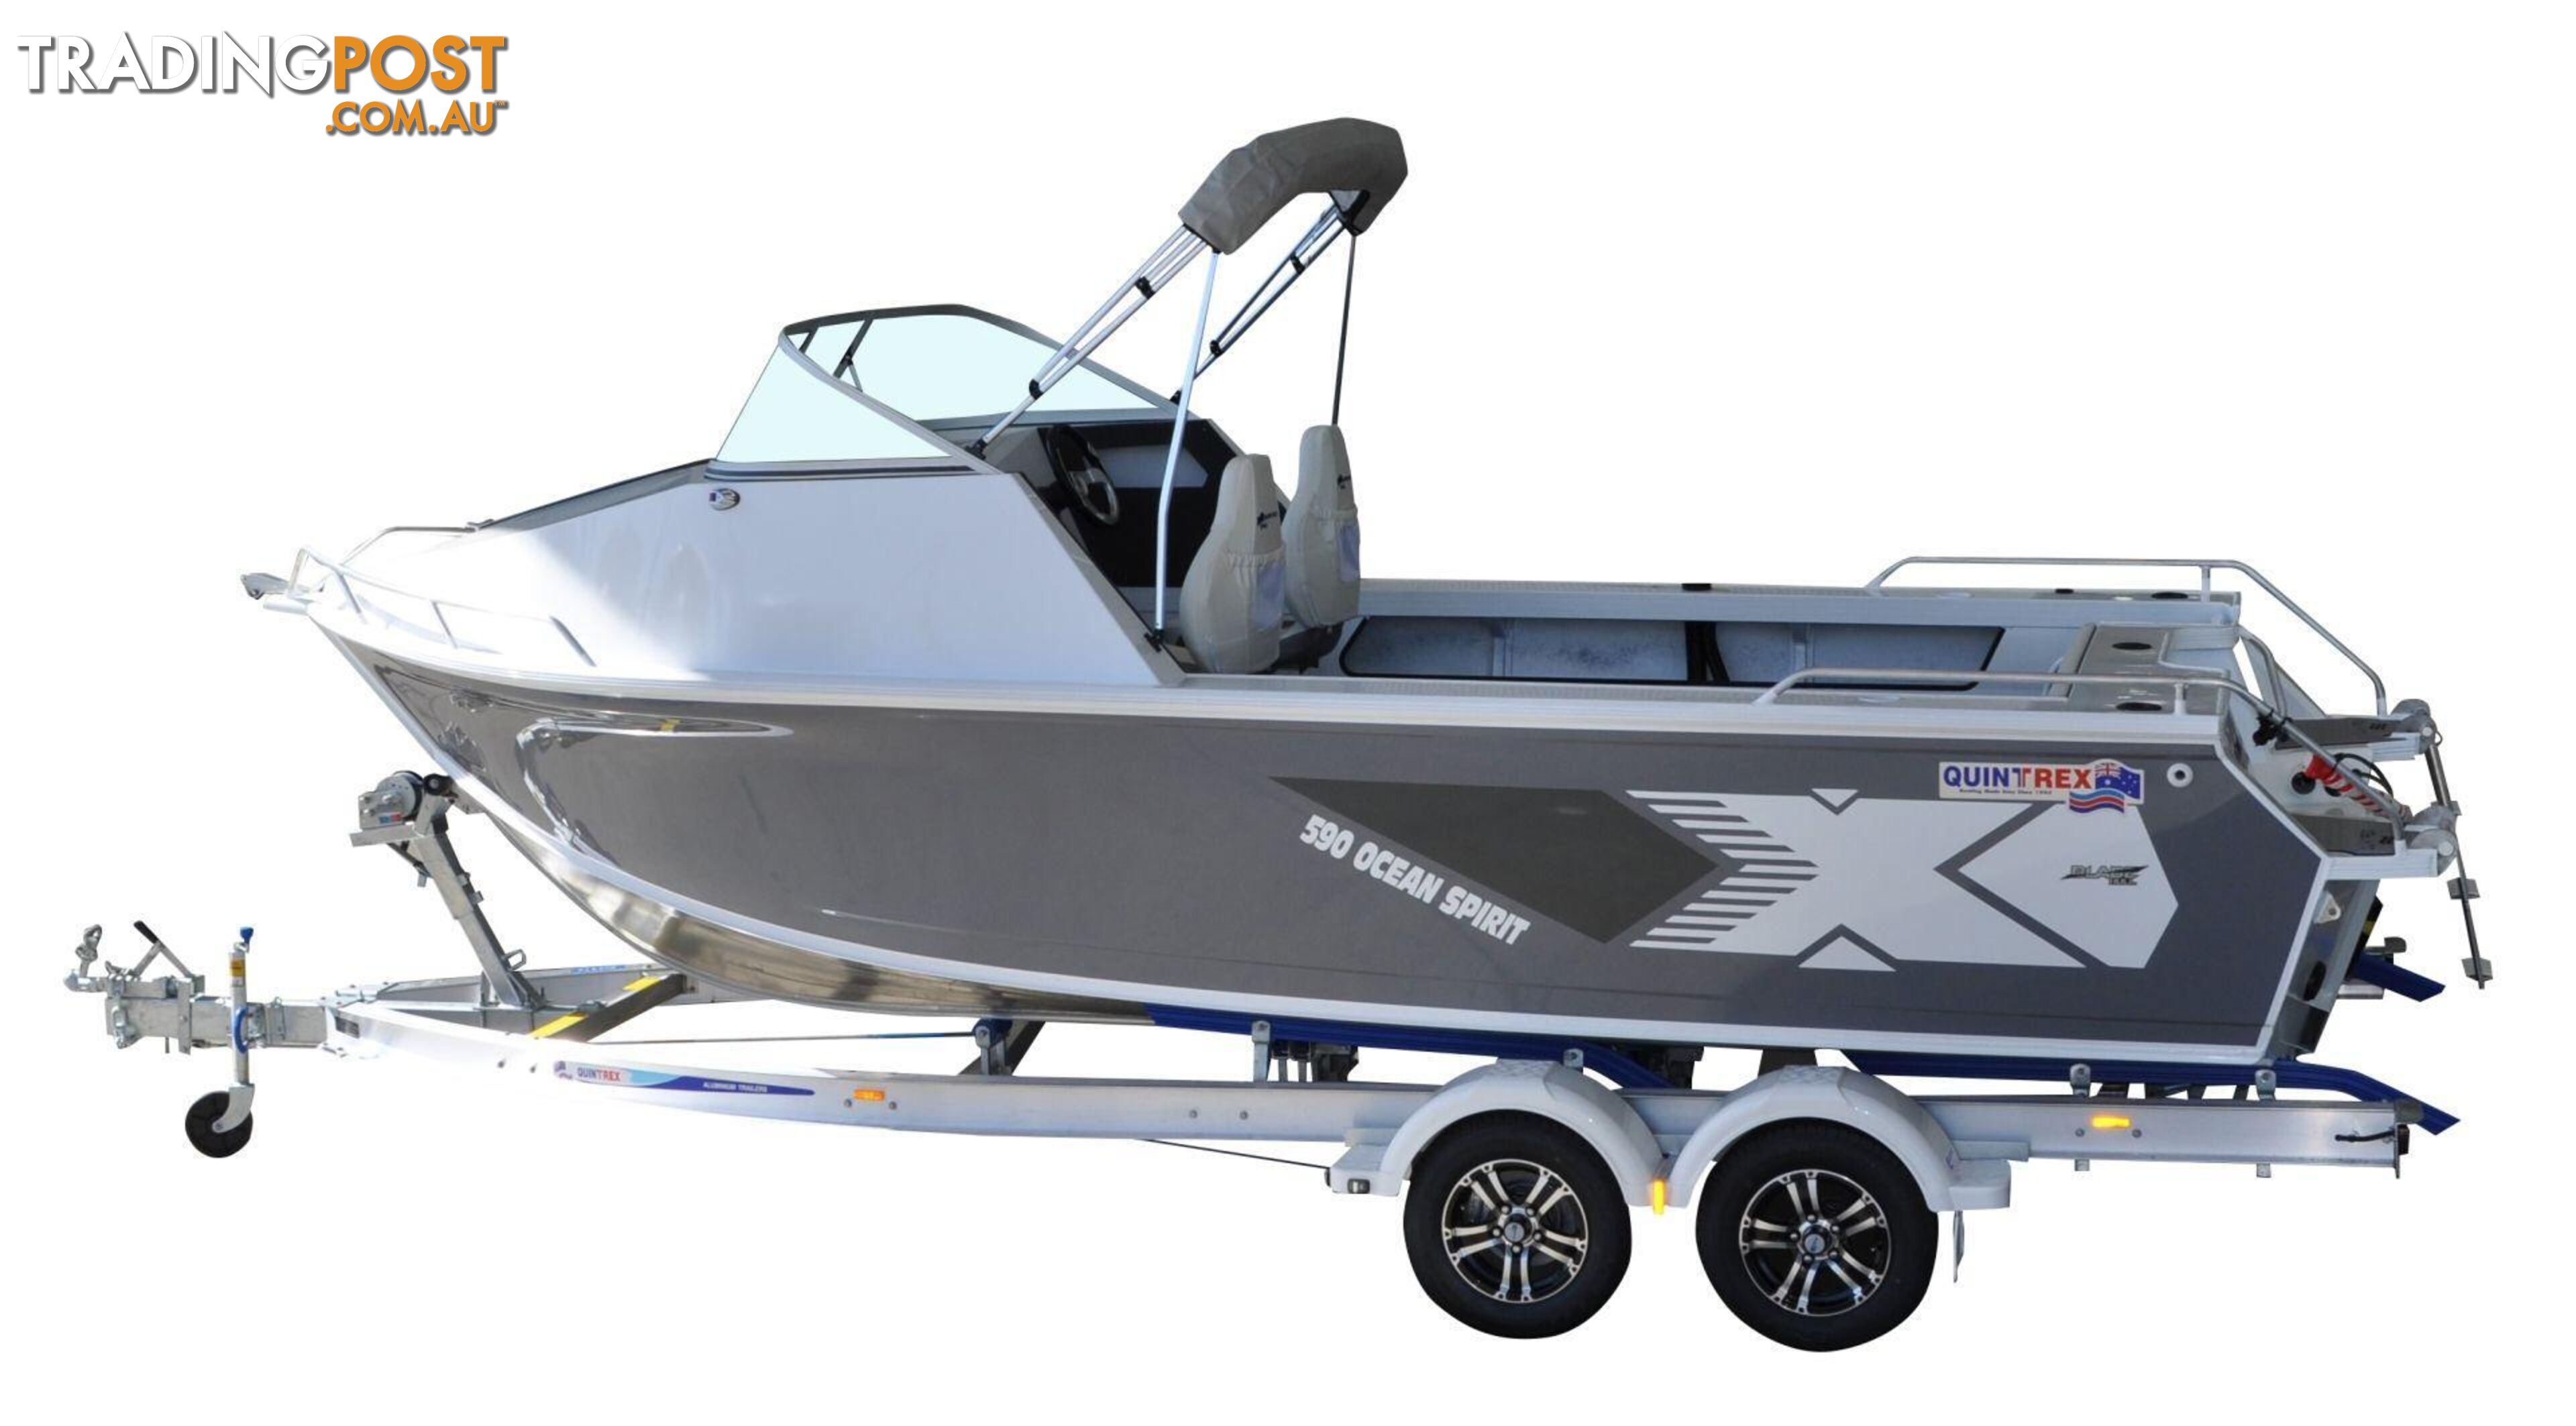 Quintrex 590 Ocean Spirit + Yamaha F130hp 4-Stroke - Pack 2 for sale online prices